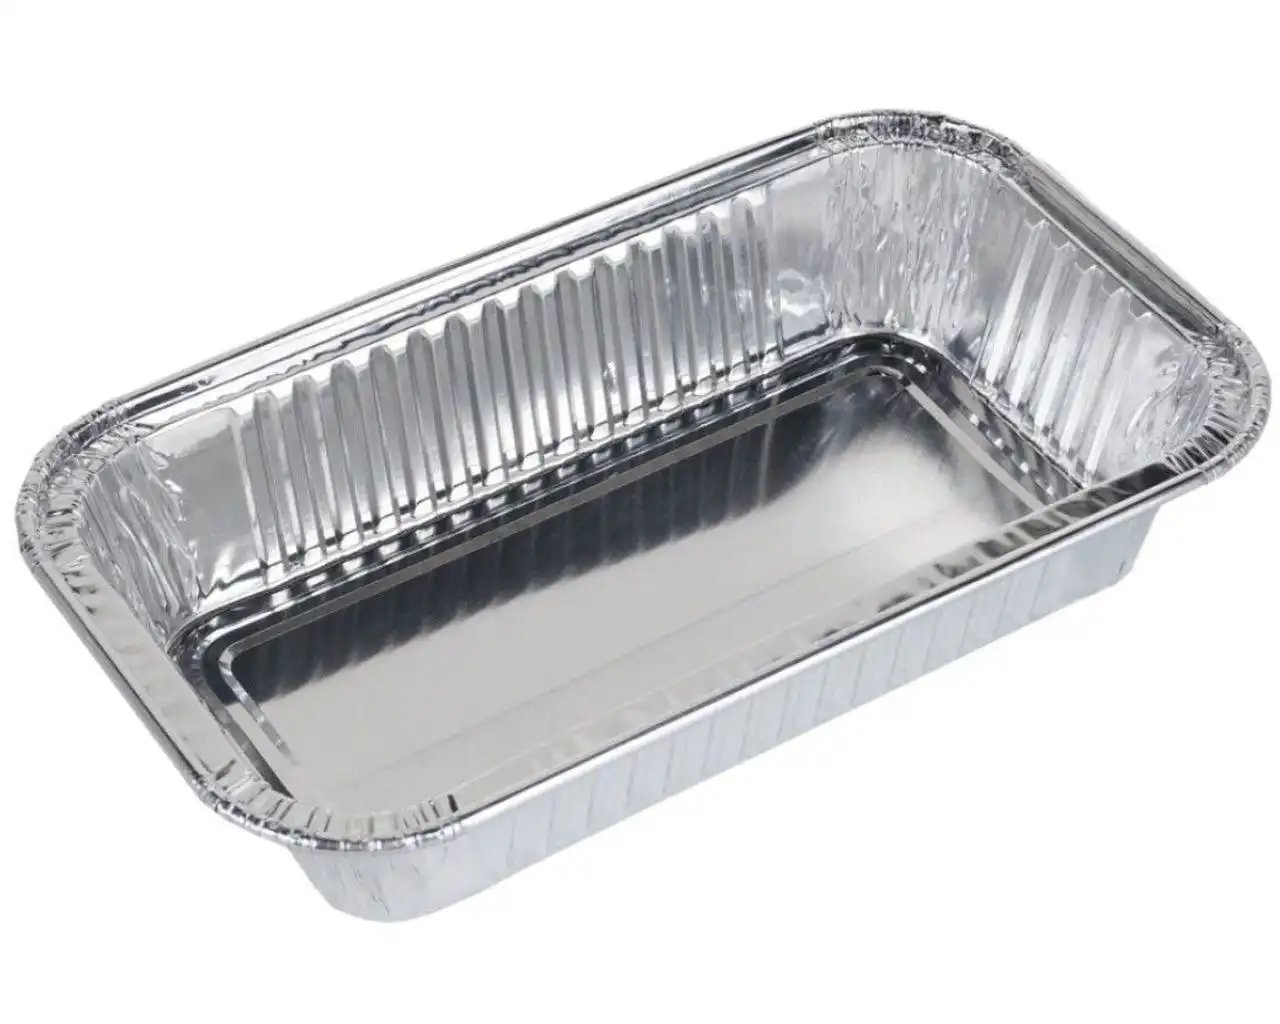 Pro Grill Foil Trays 5 Pack